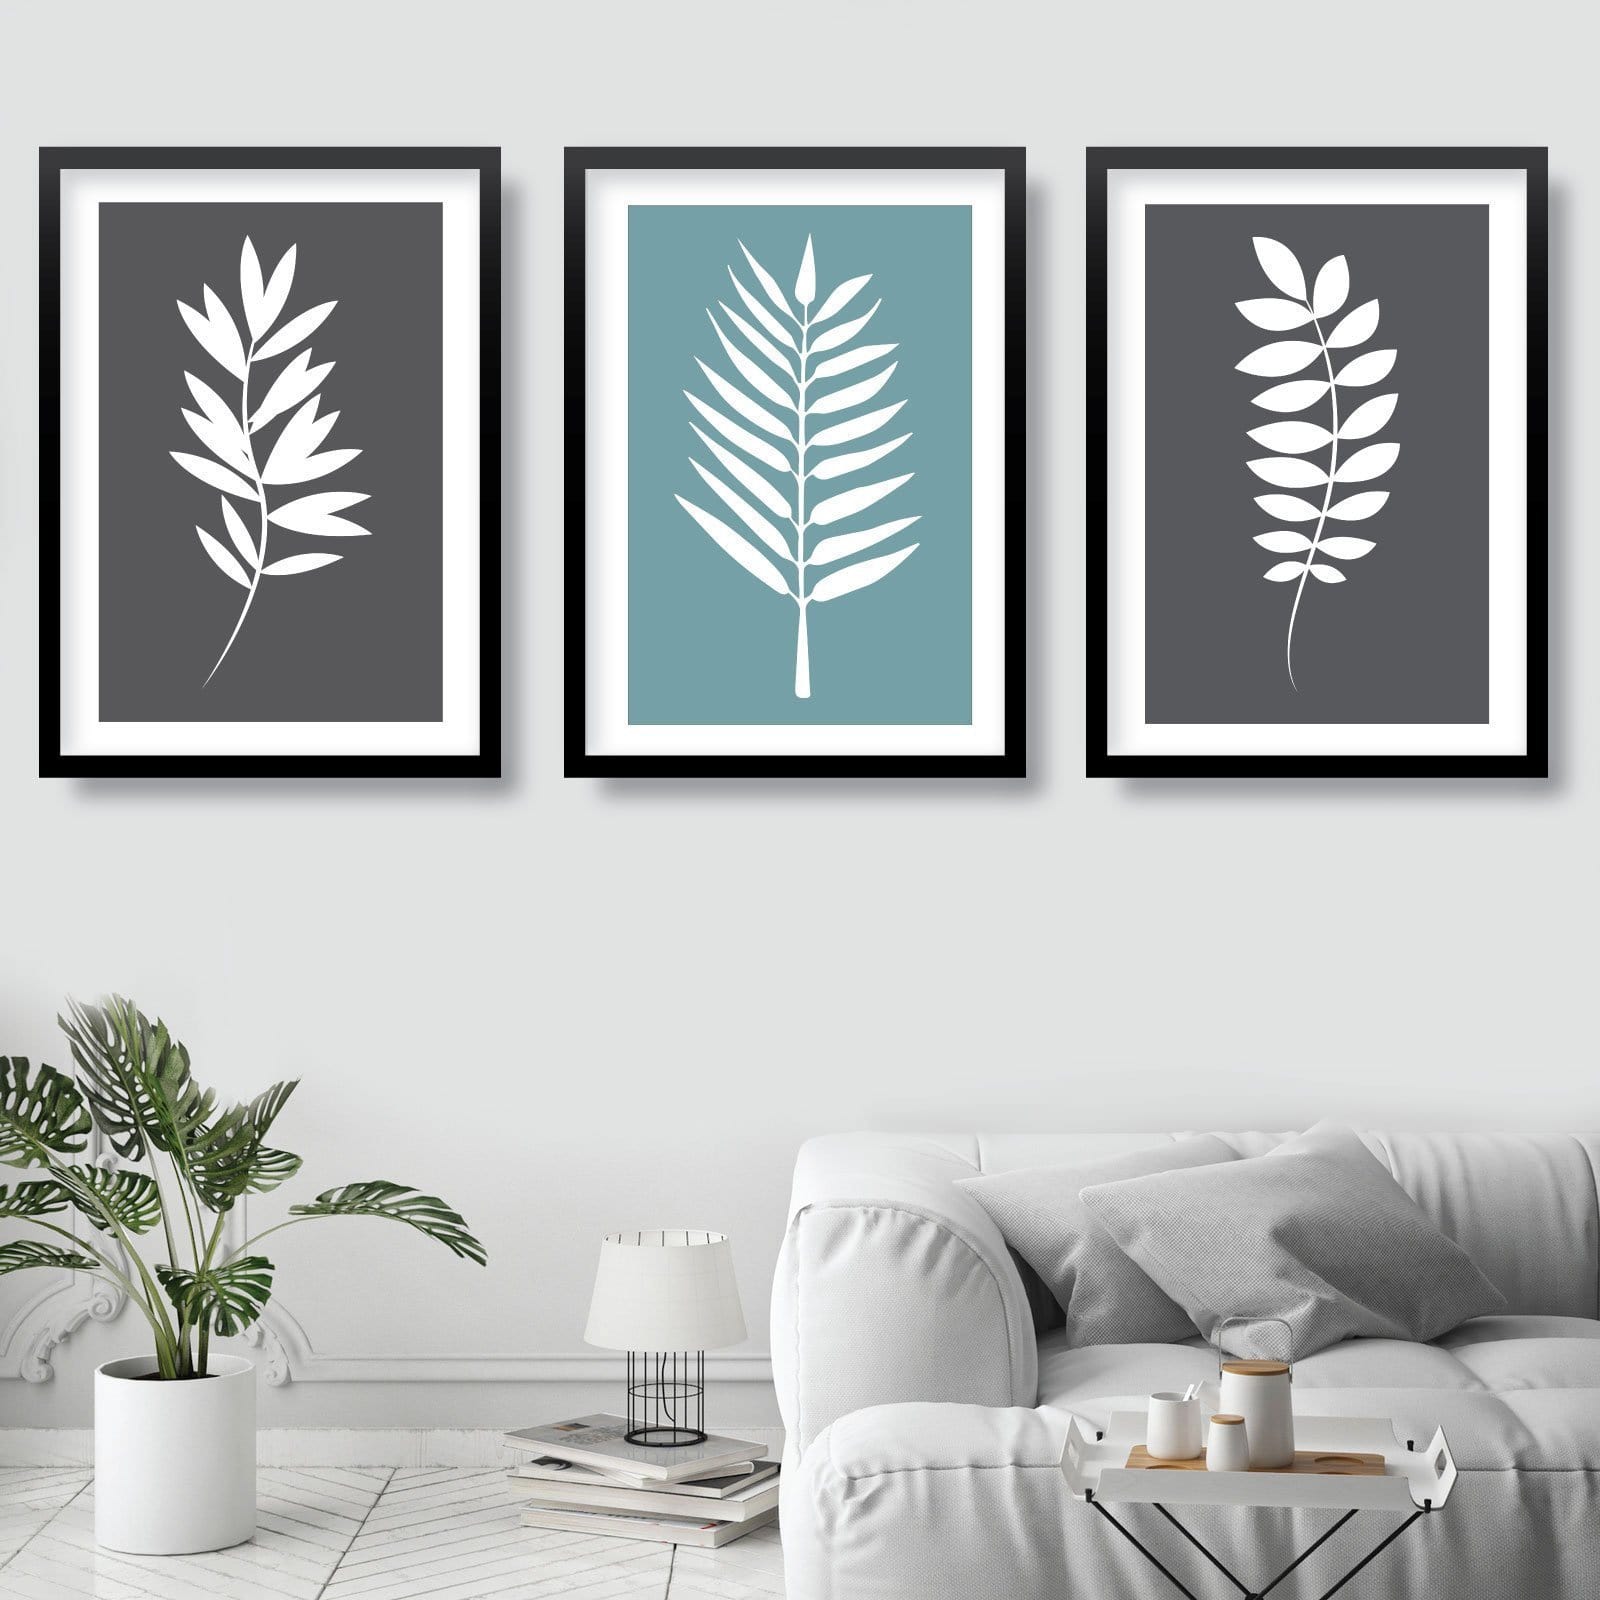 Set of 3 Grey Duck Egg Blue and White Tropical LEAVES Art Prints